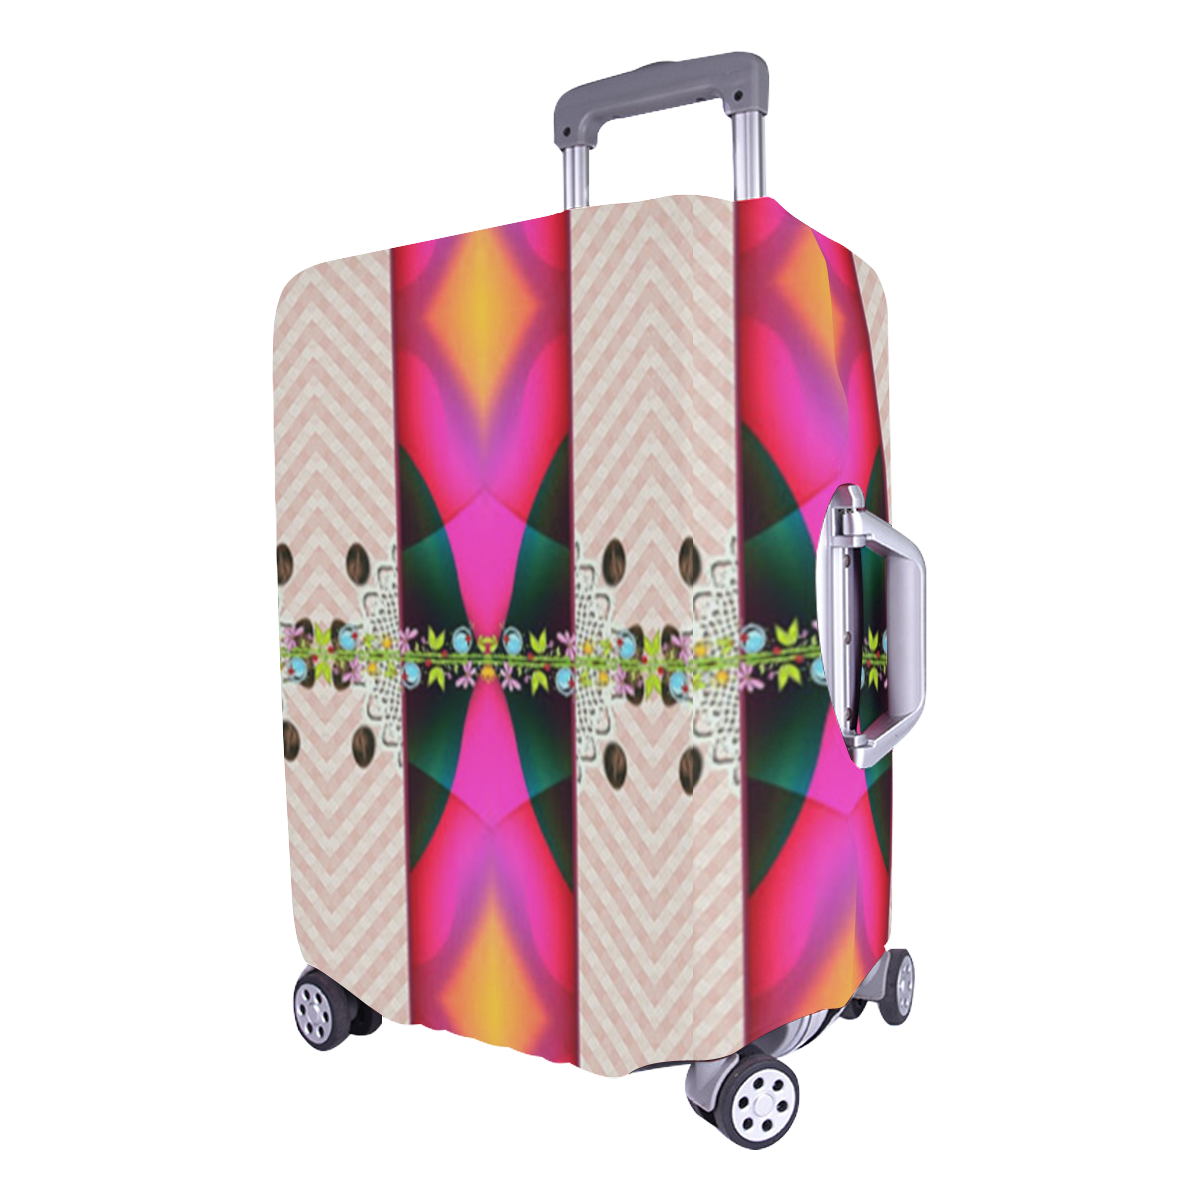 wraped suitcase- luggage with pattern-annabellerockz Luggage Cover/Large 26"-28"